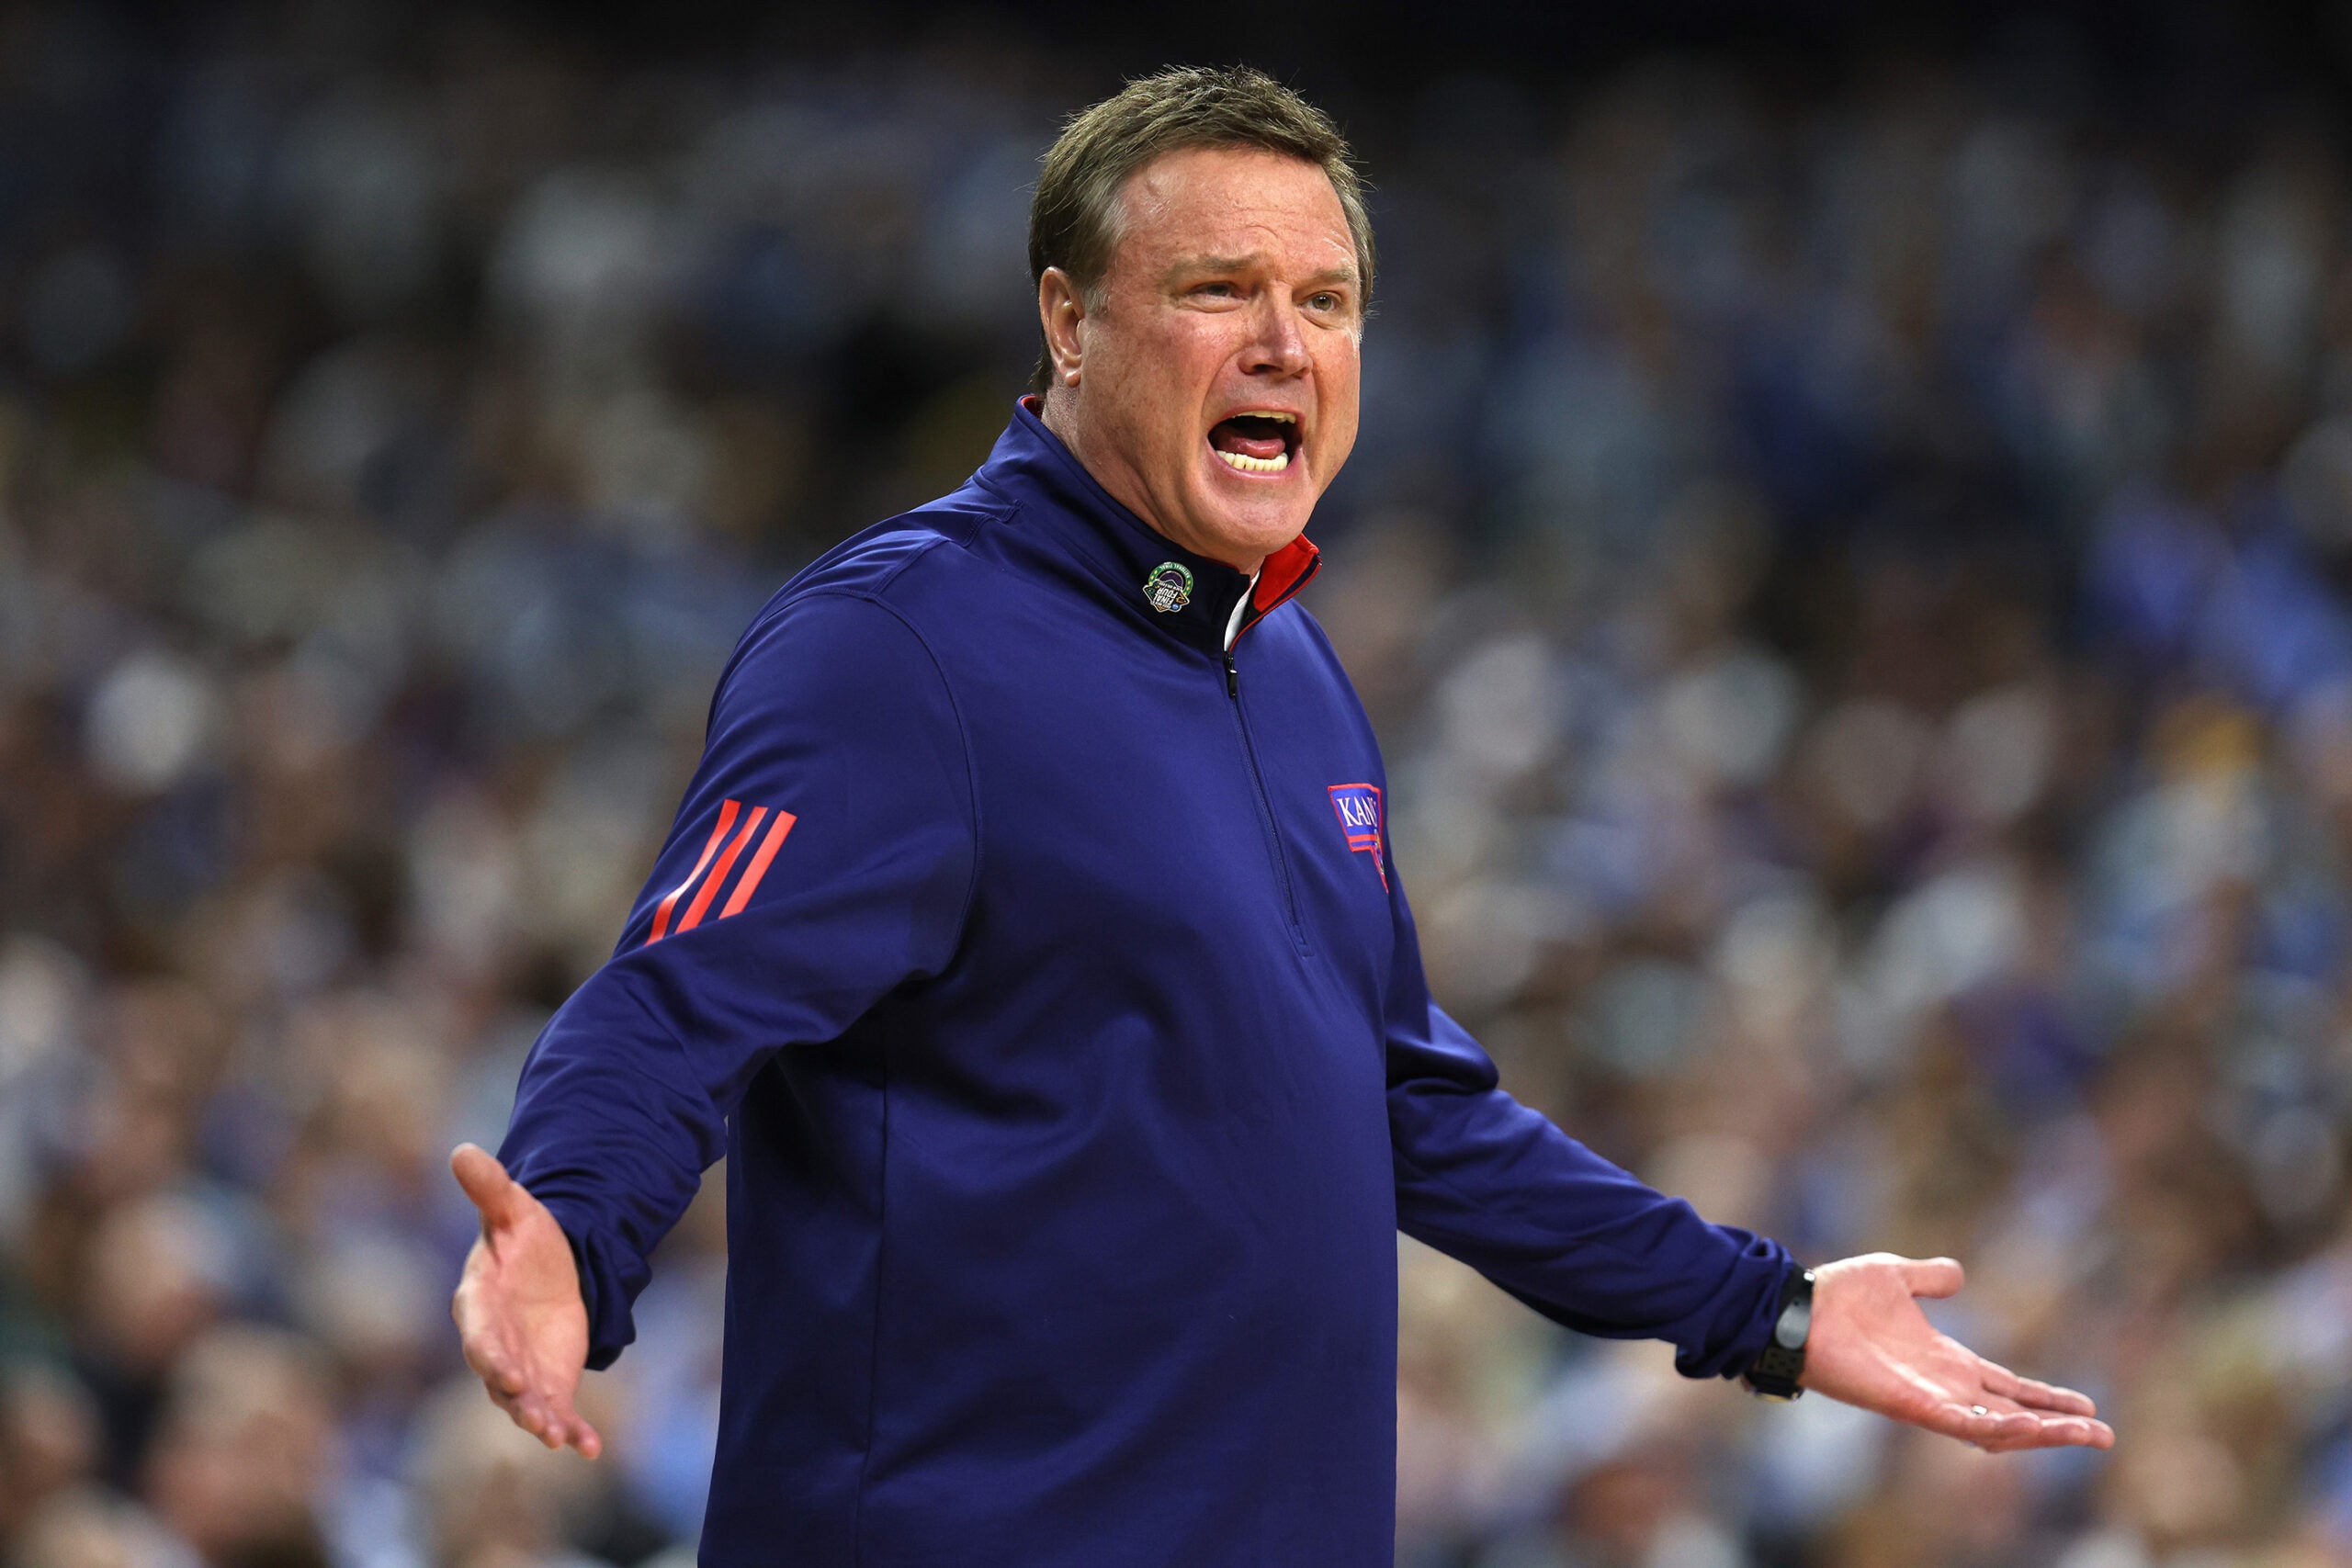 Head coach Bill Self of the Kansas Jayhawks reacts from the sidelines in the first half of the game against the North Carolina Tar Heels during the 2022 NCAA Men's Basketball Tournament National Championship.